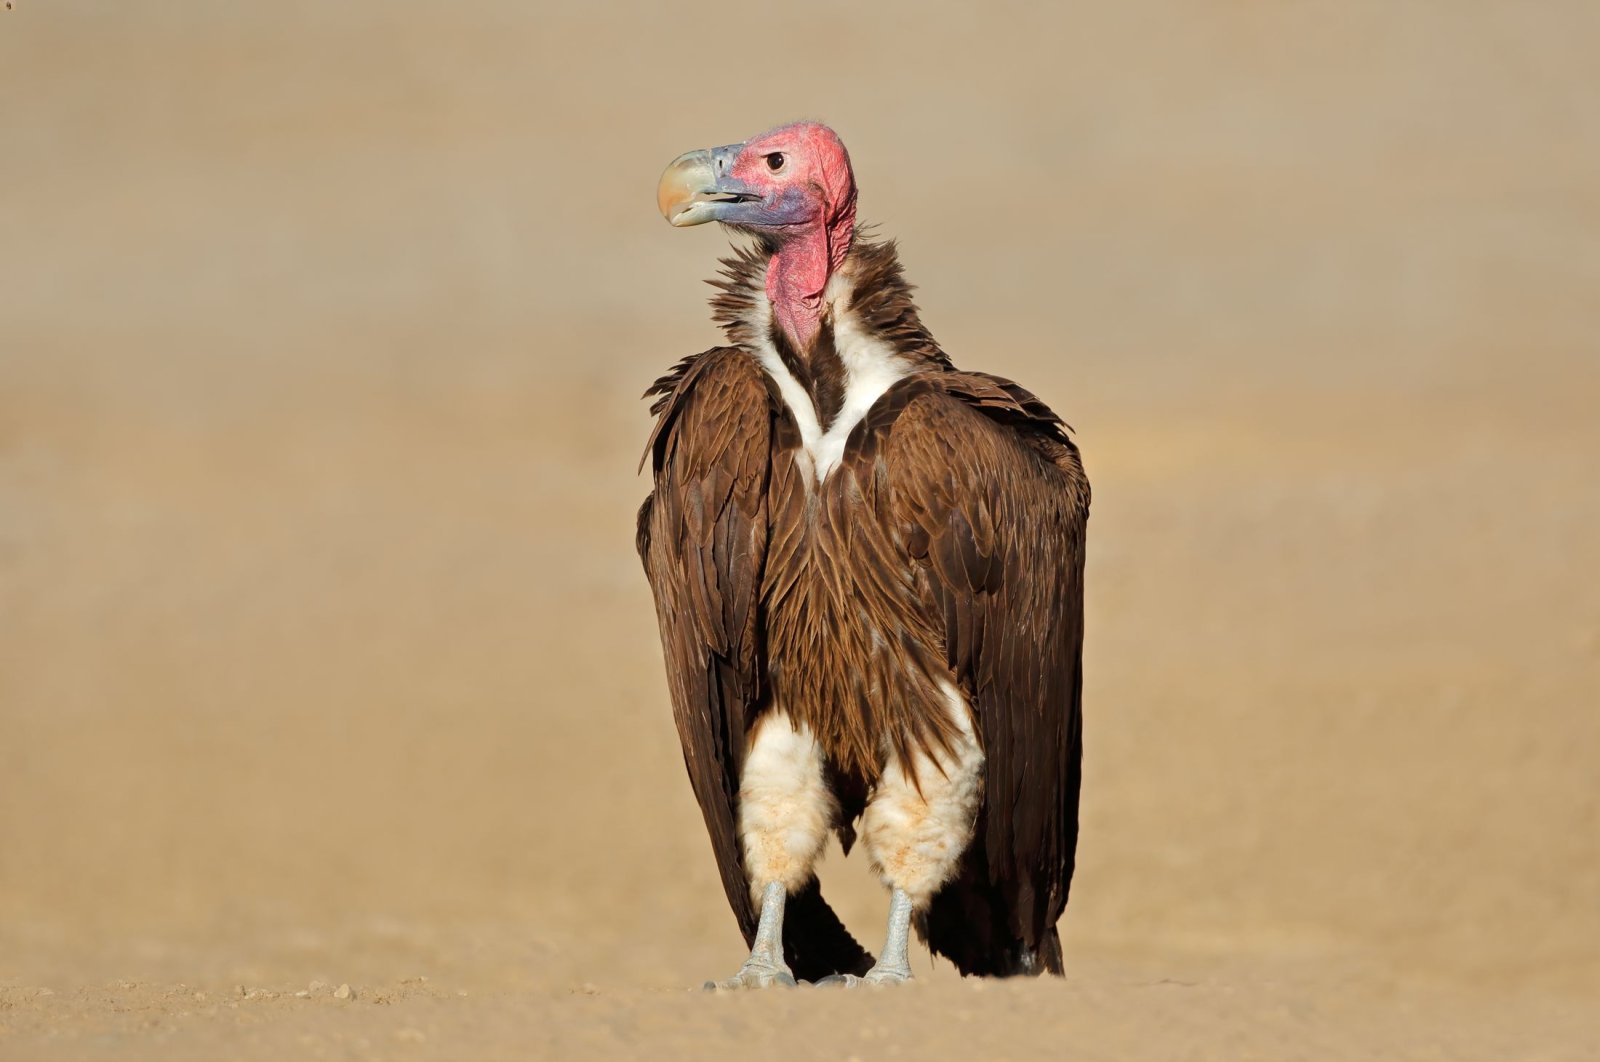 Vulture poisoning is not uncommon in wildlife-rich southern Africa, where they are targeted by poachers. (Shutterstock Photo)